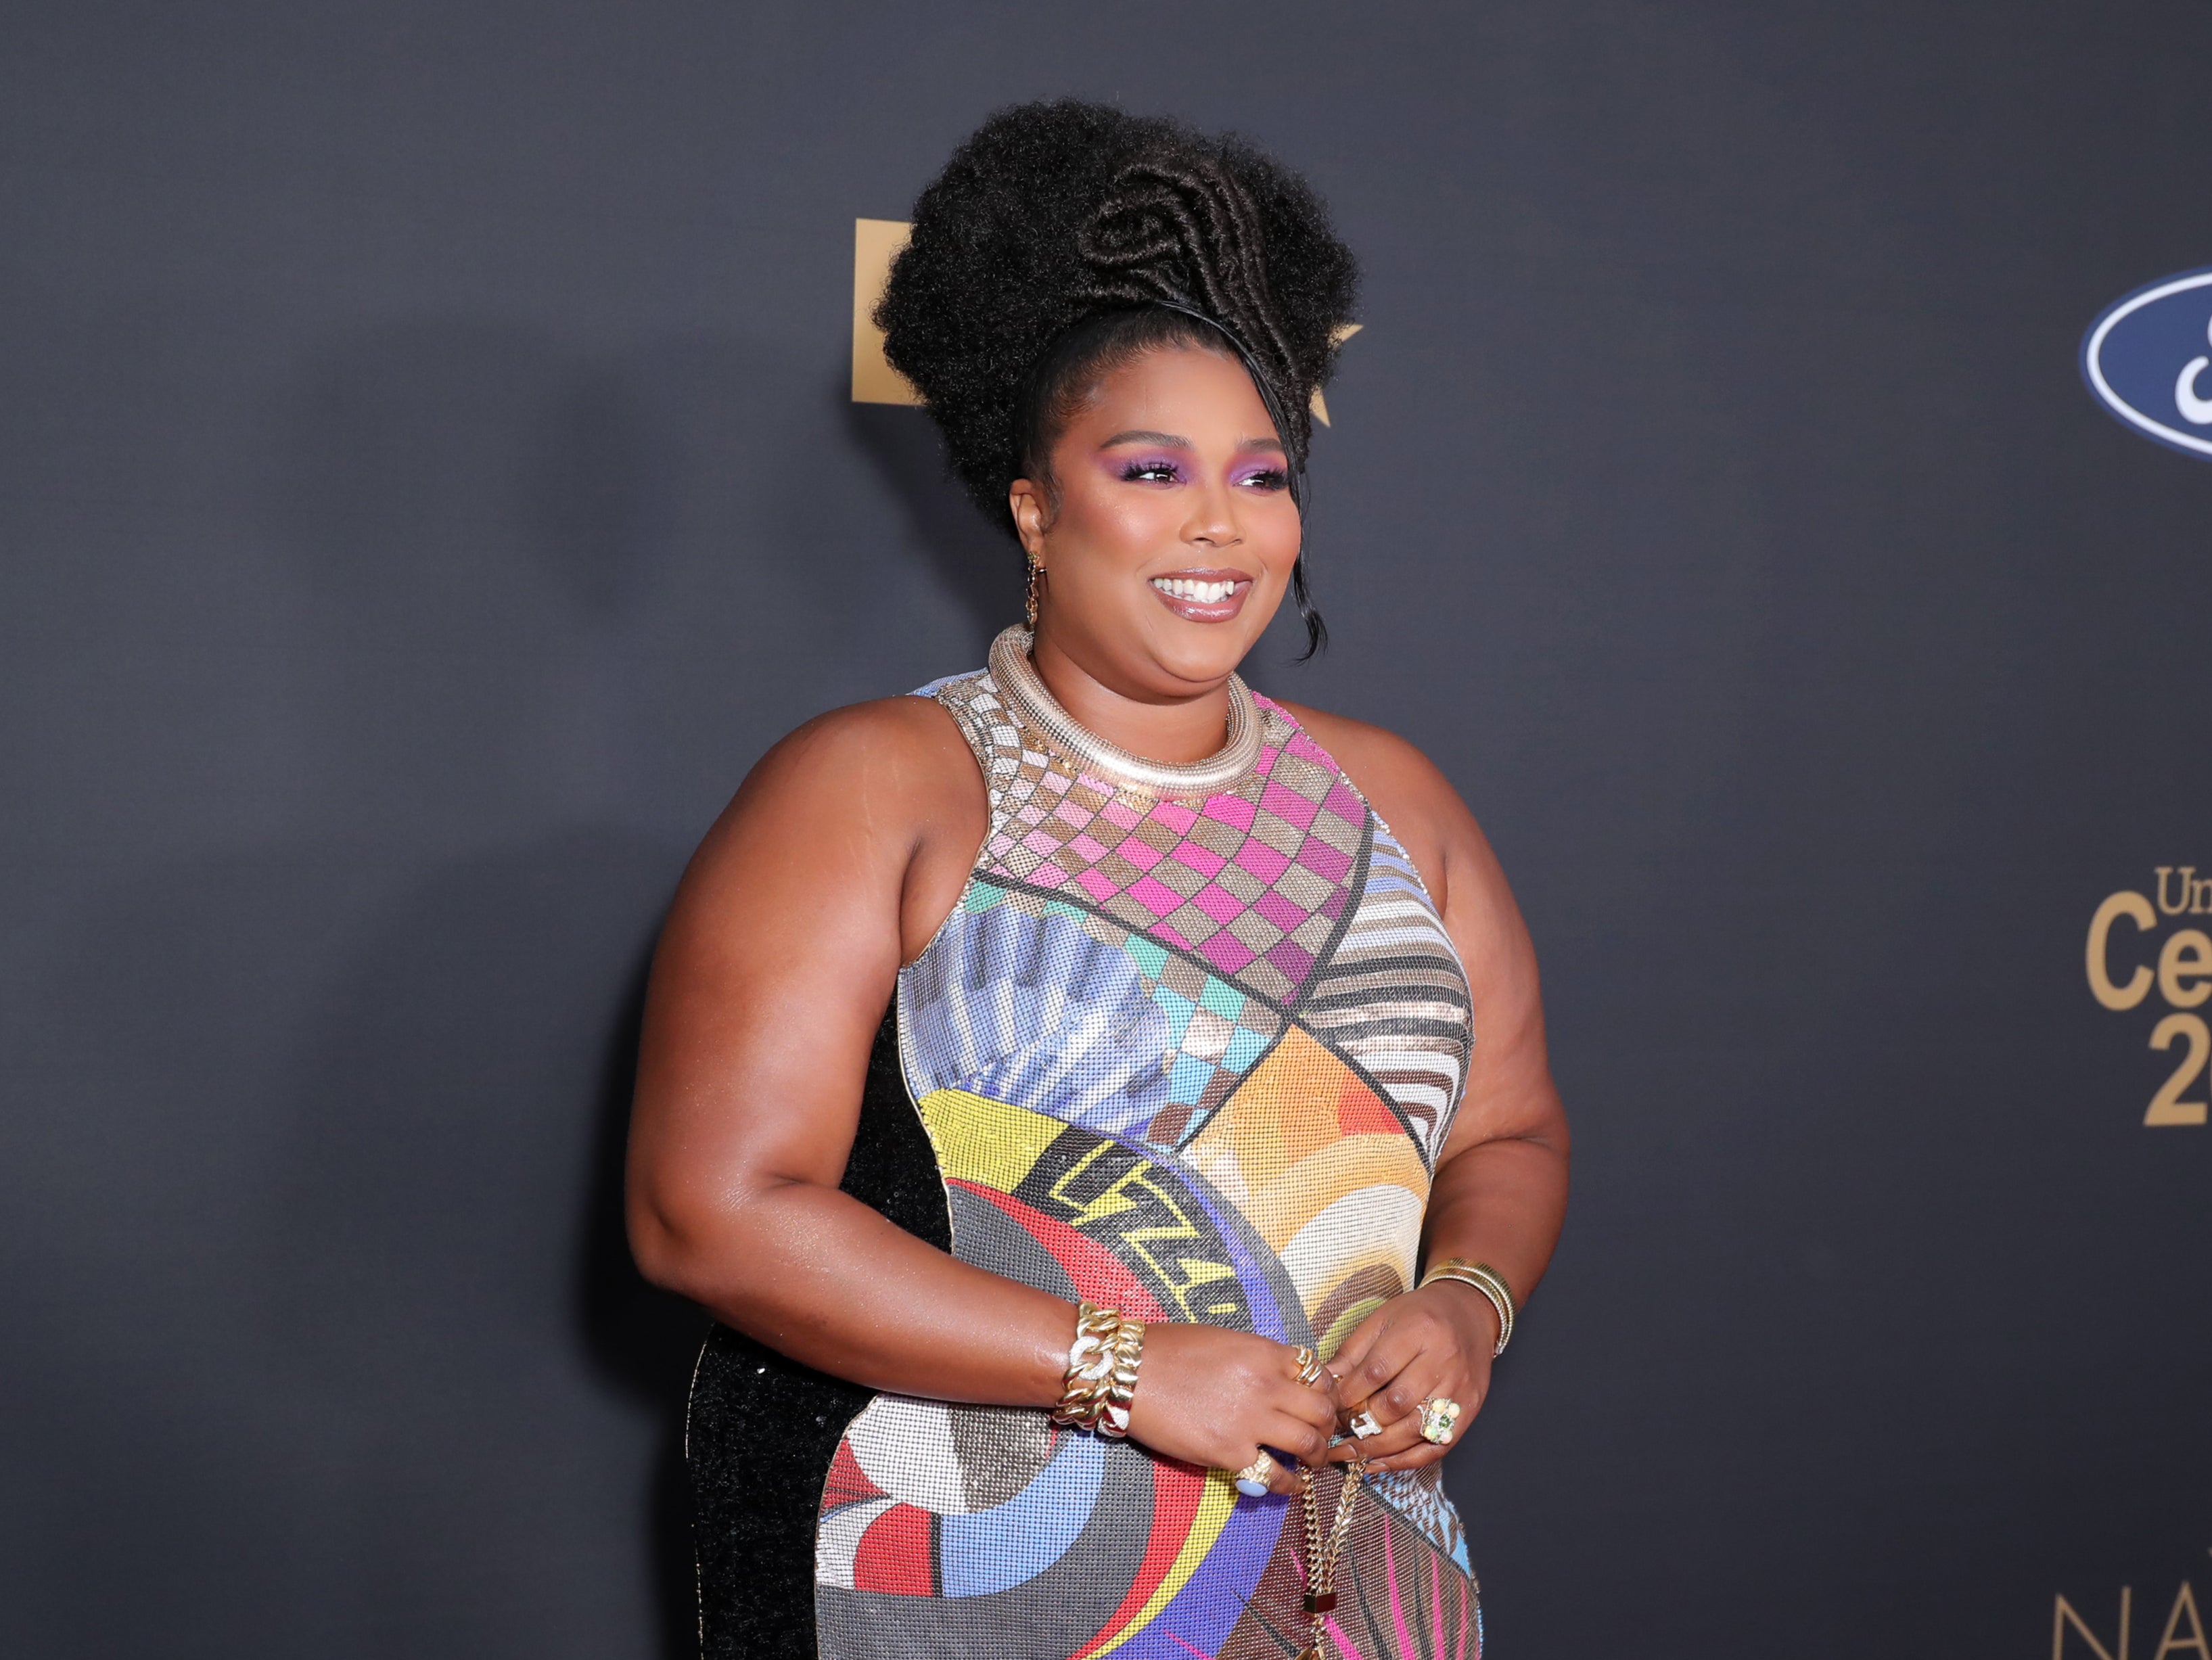 Lizzo launches Yitty, a new body-positive shapewear line - Good